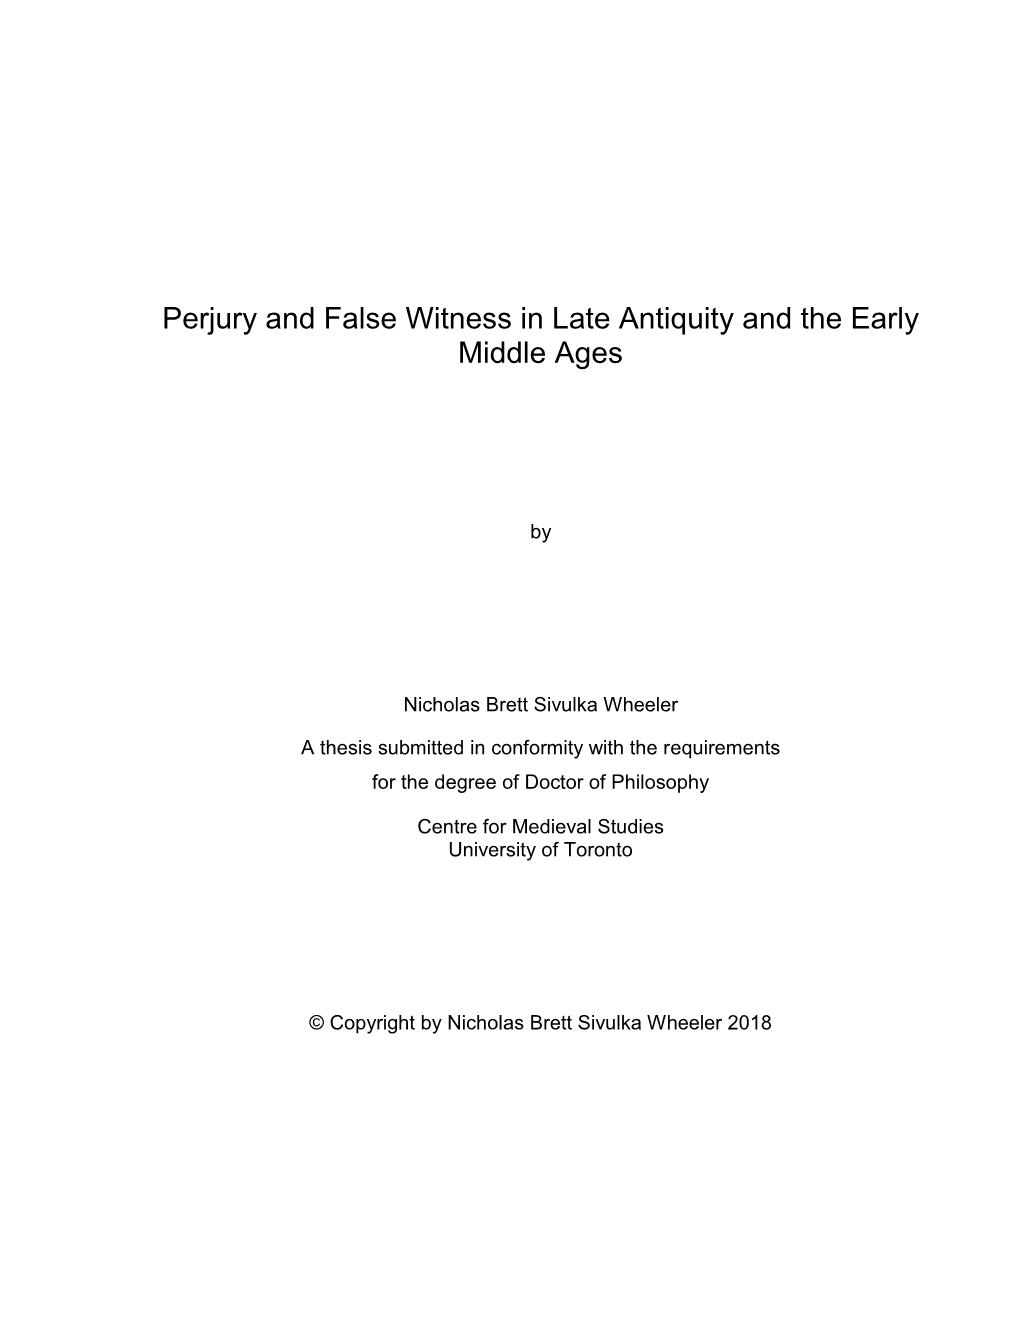 Perjury and False Witness in Late Antiquity and the Early Middle Ages